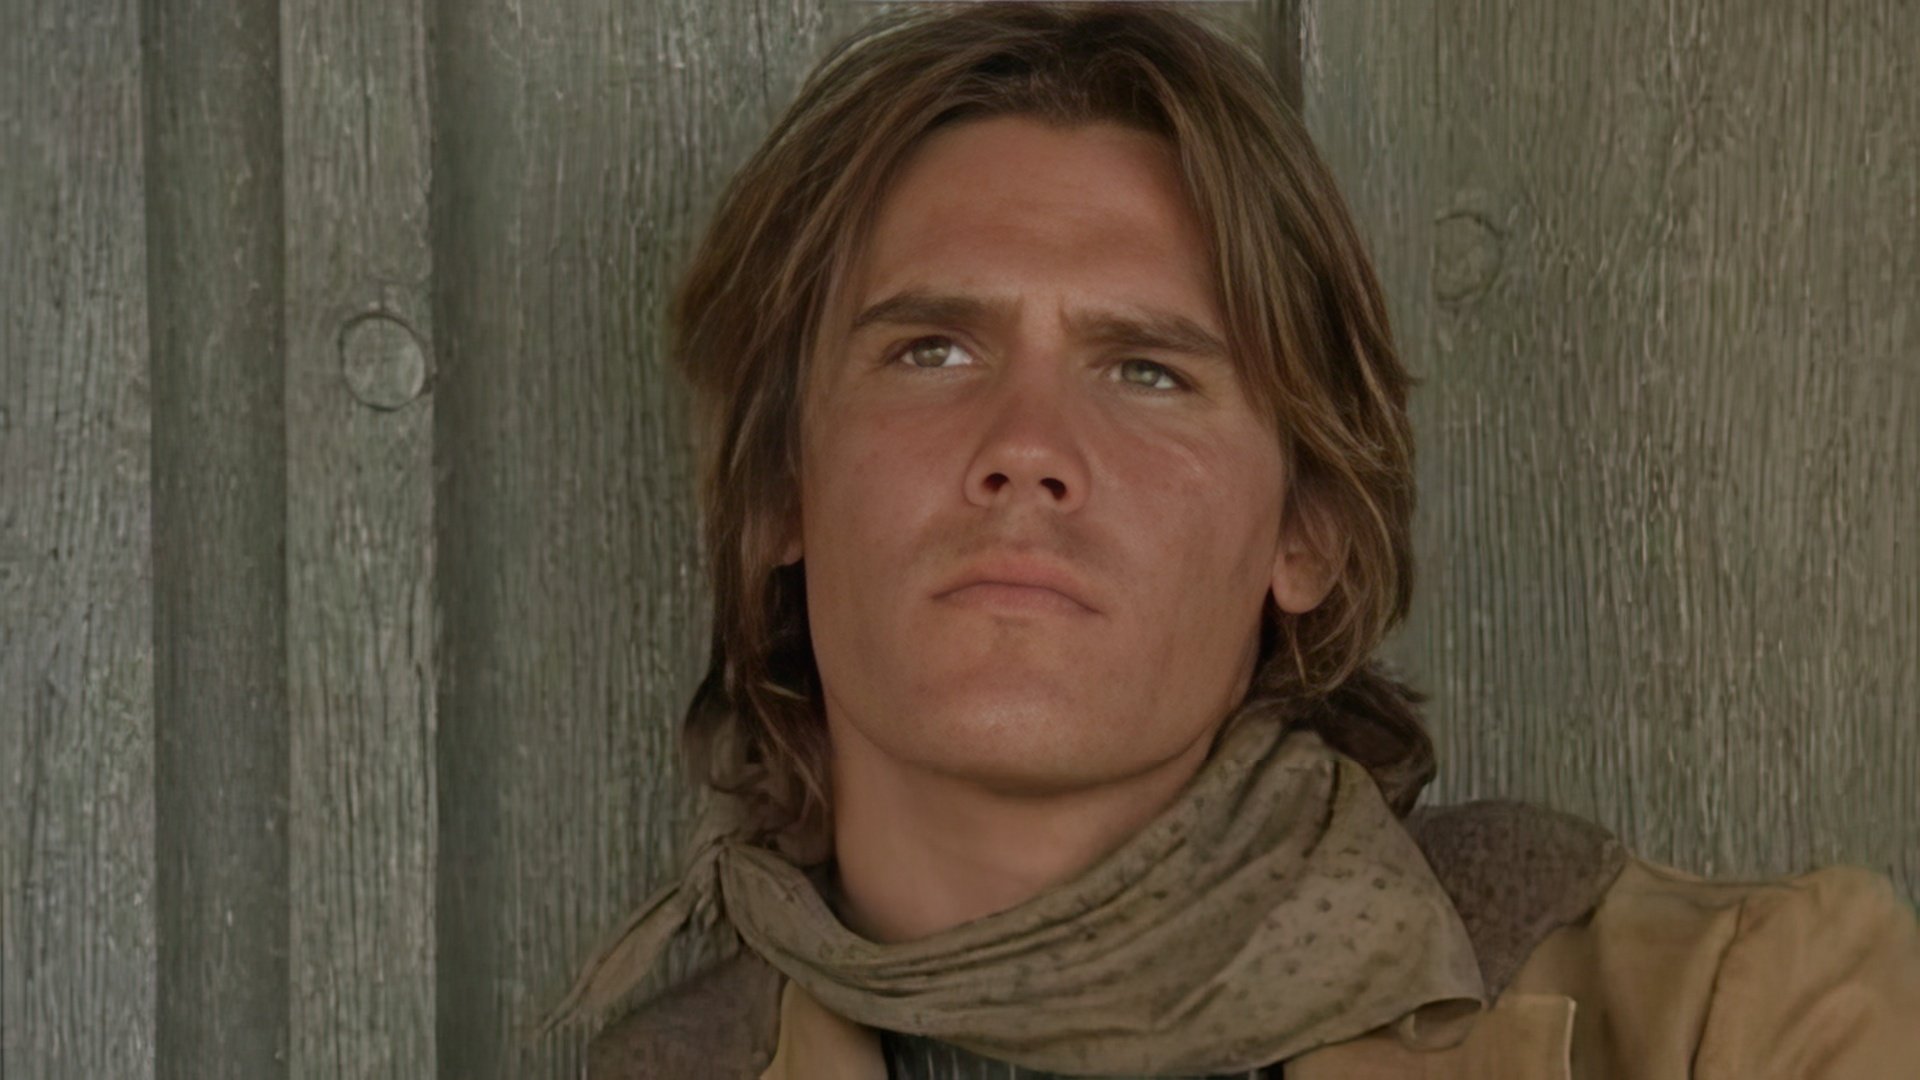 Josh Brolin in the movie The Young Riders